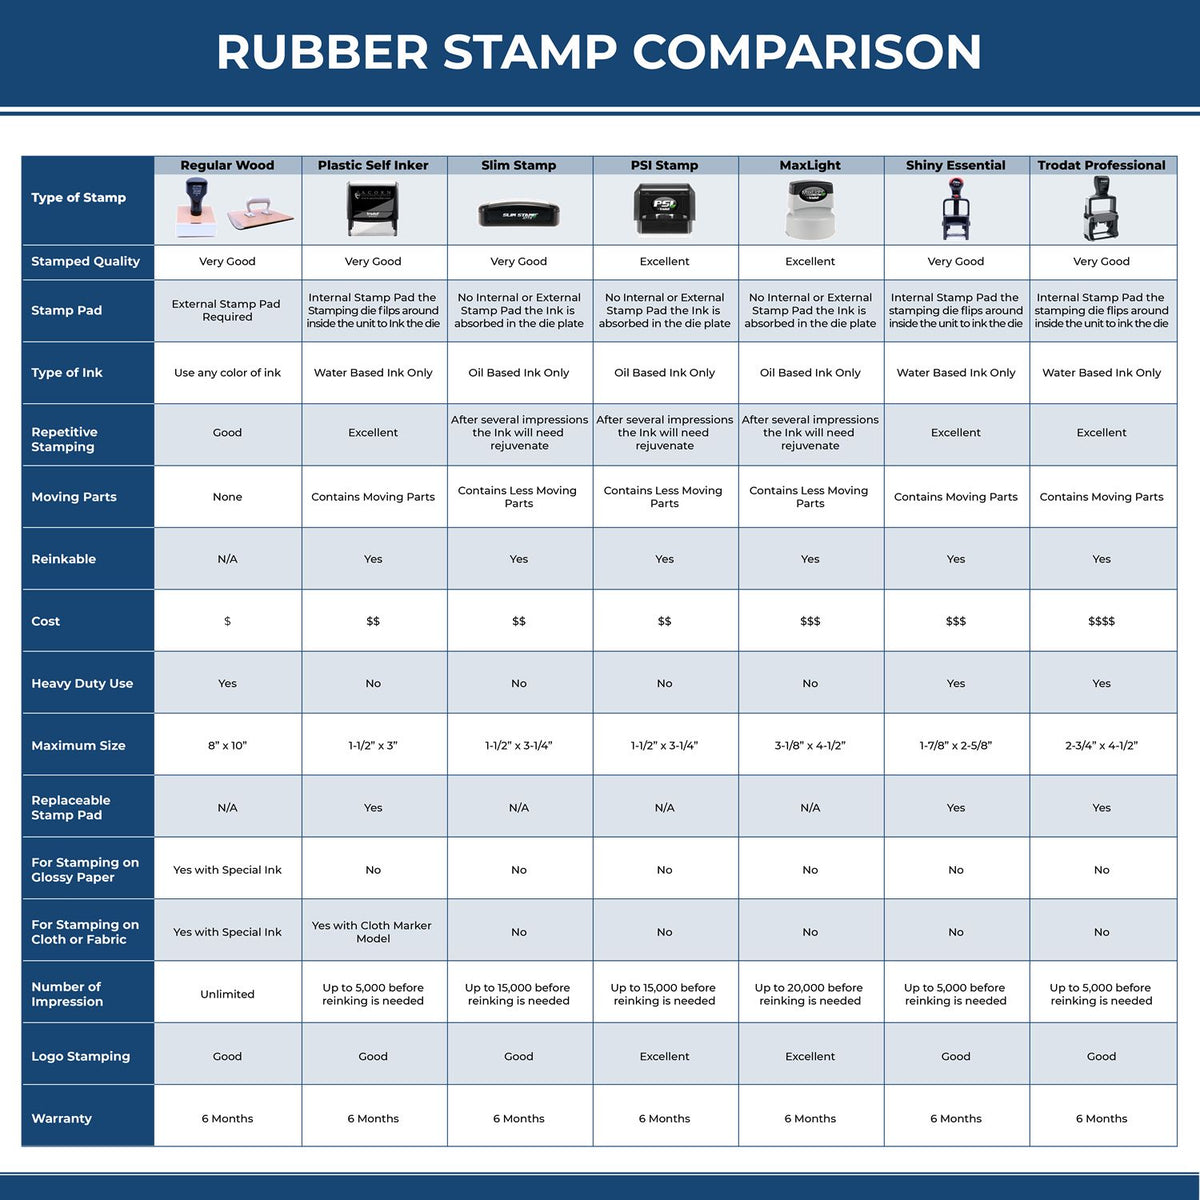 Large Self Inking Notarize Stamp 4618S Rubber Stamp Comparison